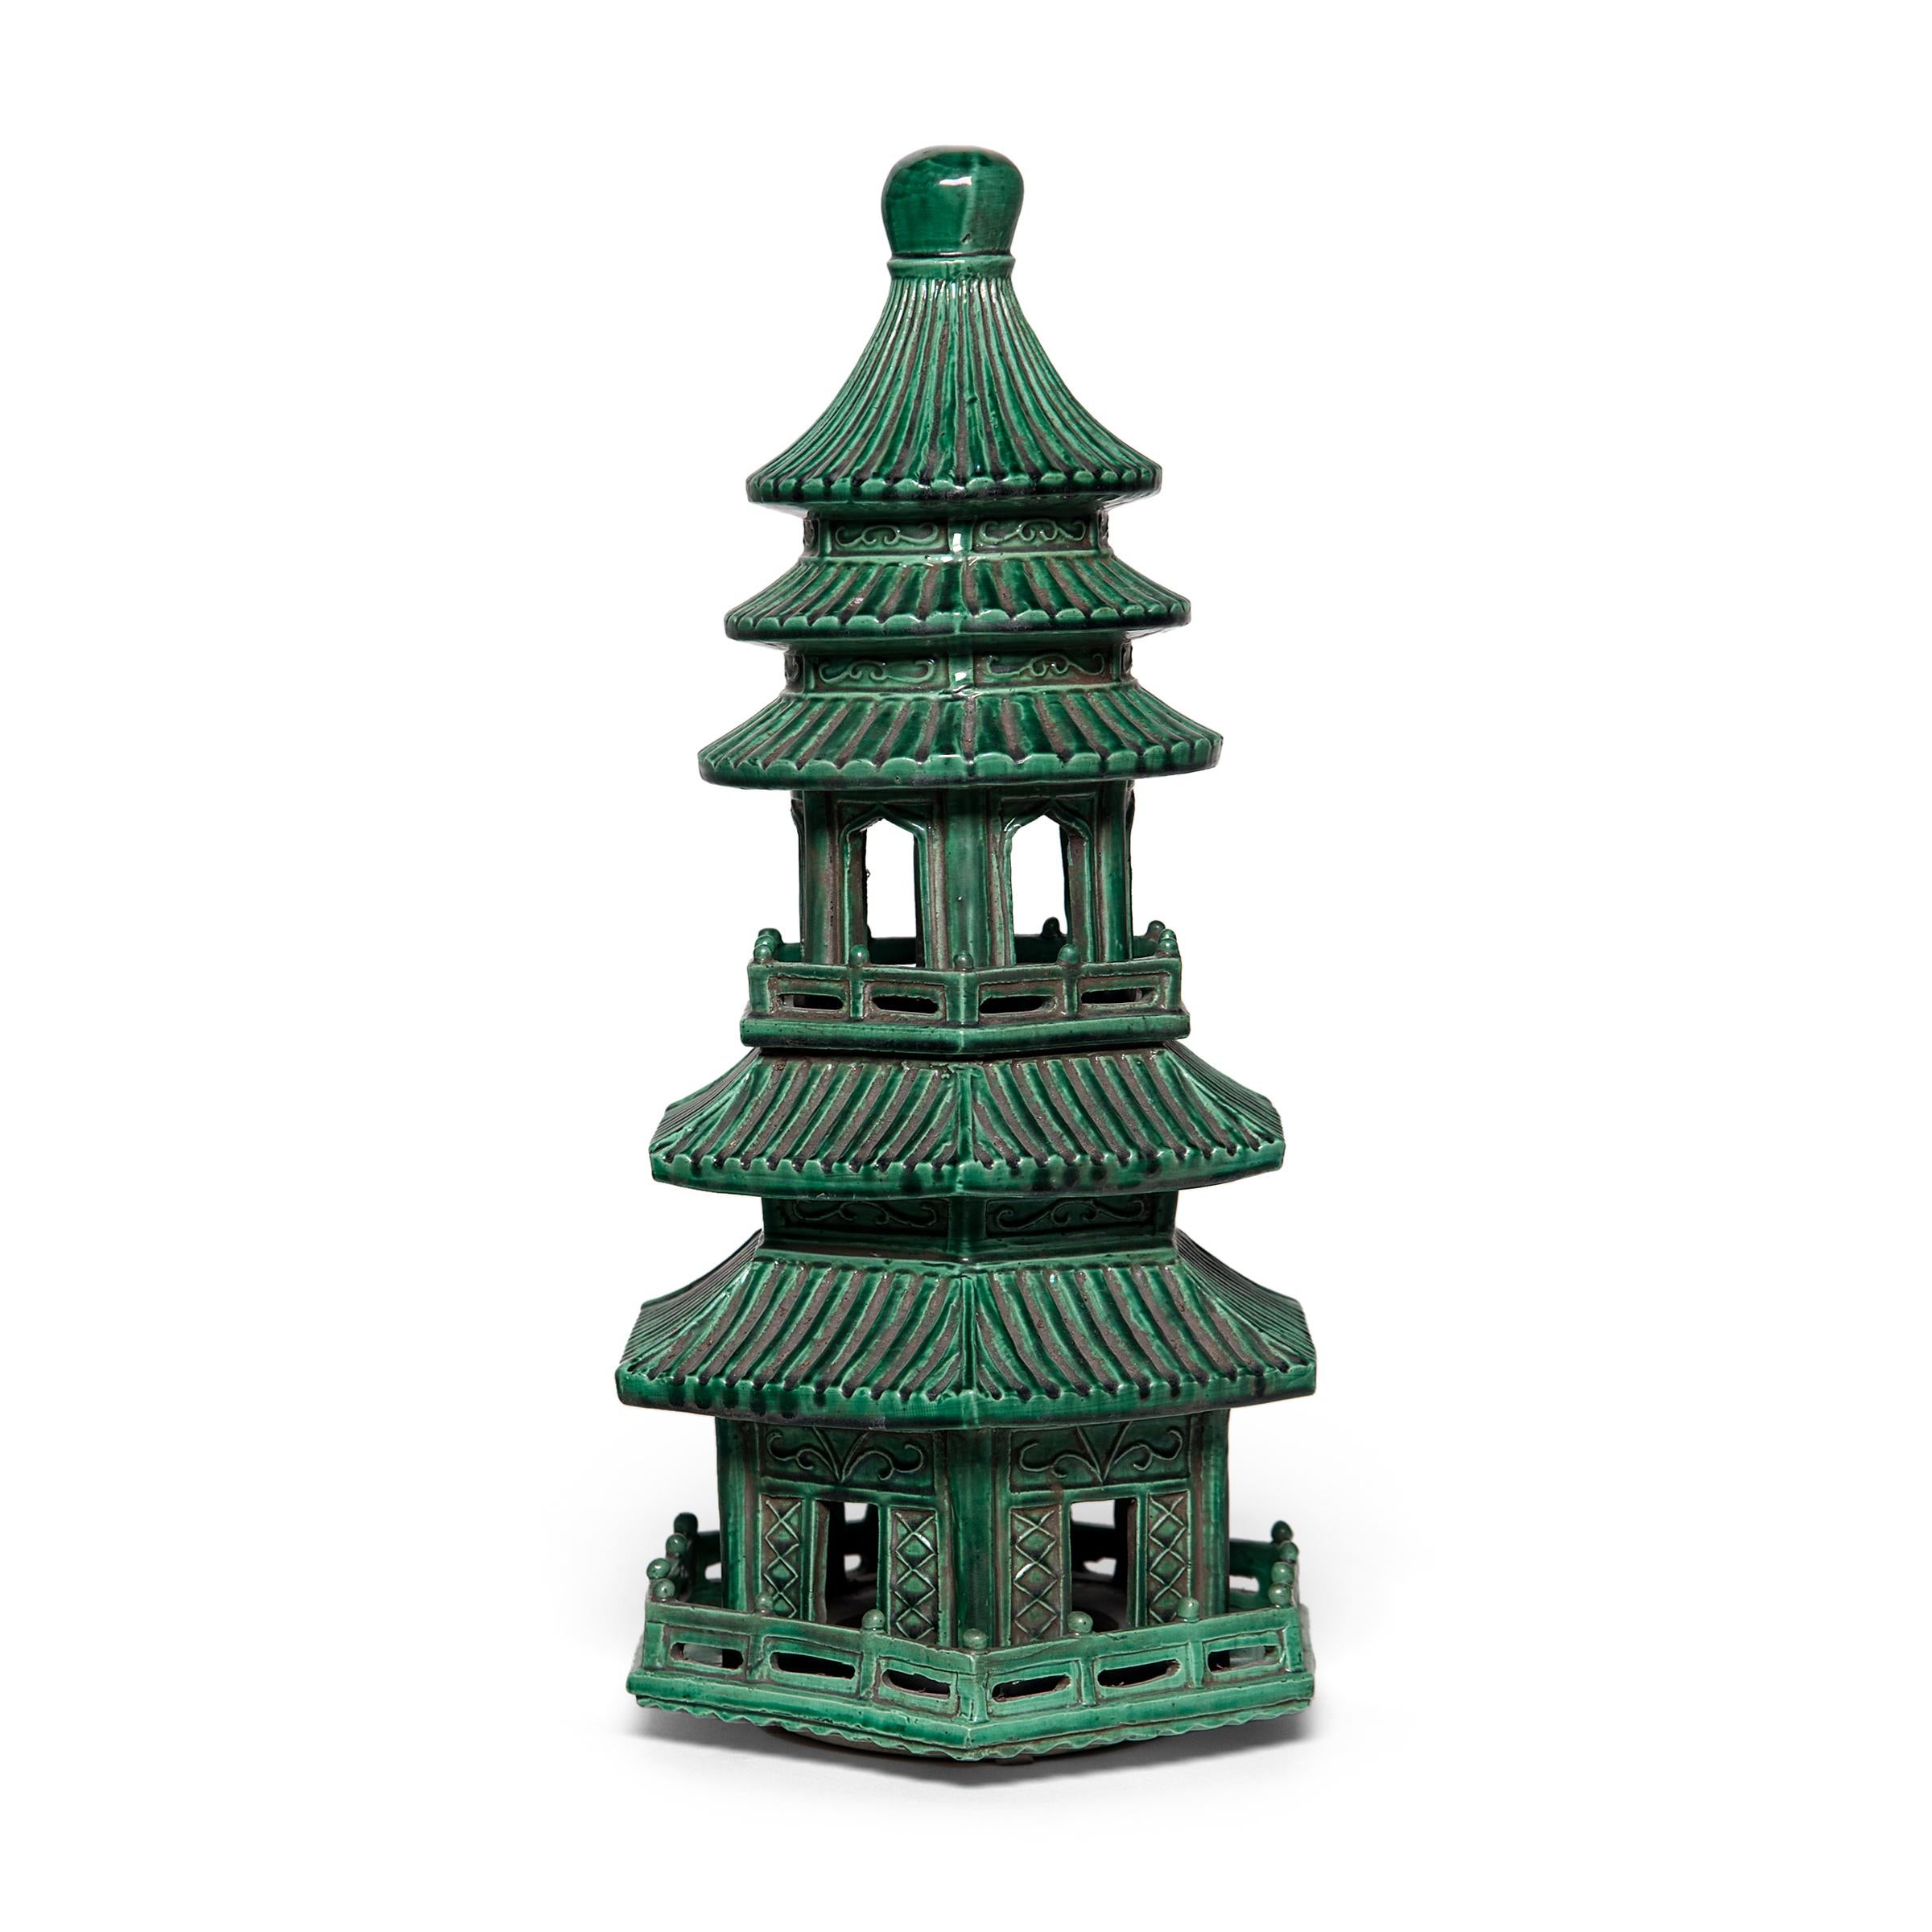 This miniature ceramic pagoda tower was originally the uppermost portion of a large pagoda-shaped incense burner with several tiers. Incense burnt at the base of each tier would drift upwards through the pagoda and spill out from its many doorways